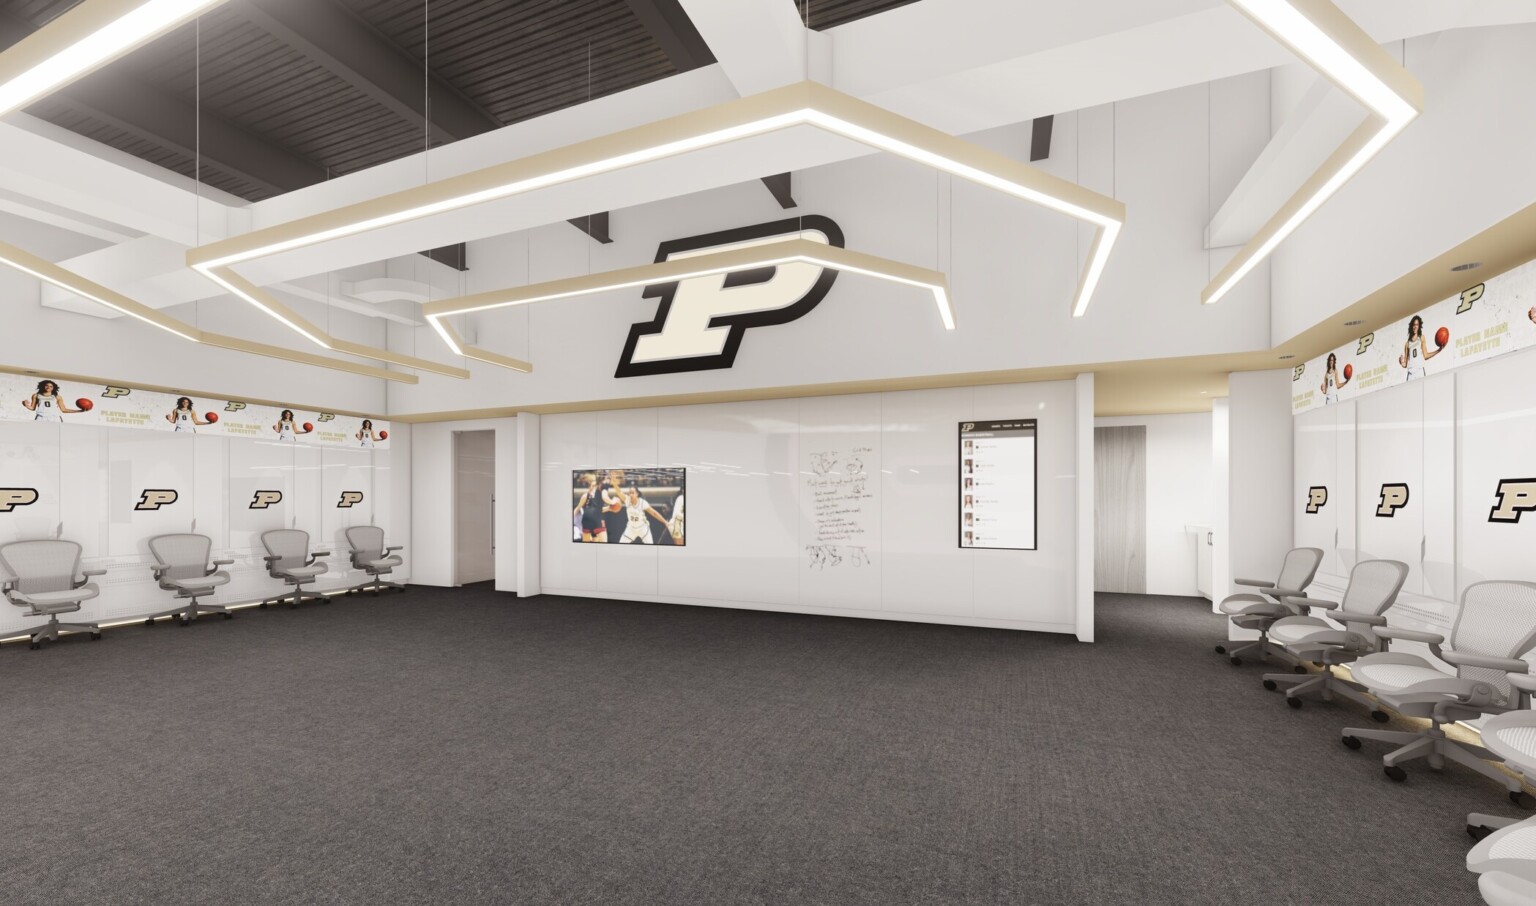 Double height white locker room with full length white board wall opposite, Purdue logo, concentric squared arch shaped pendant lights hanging